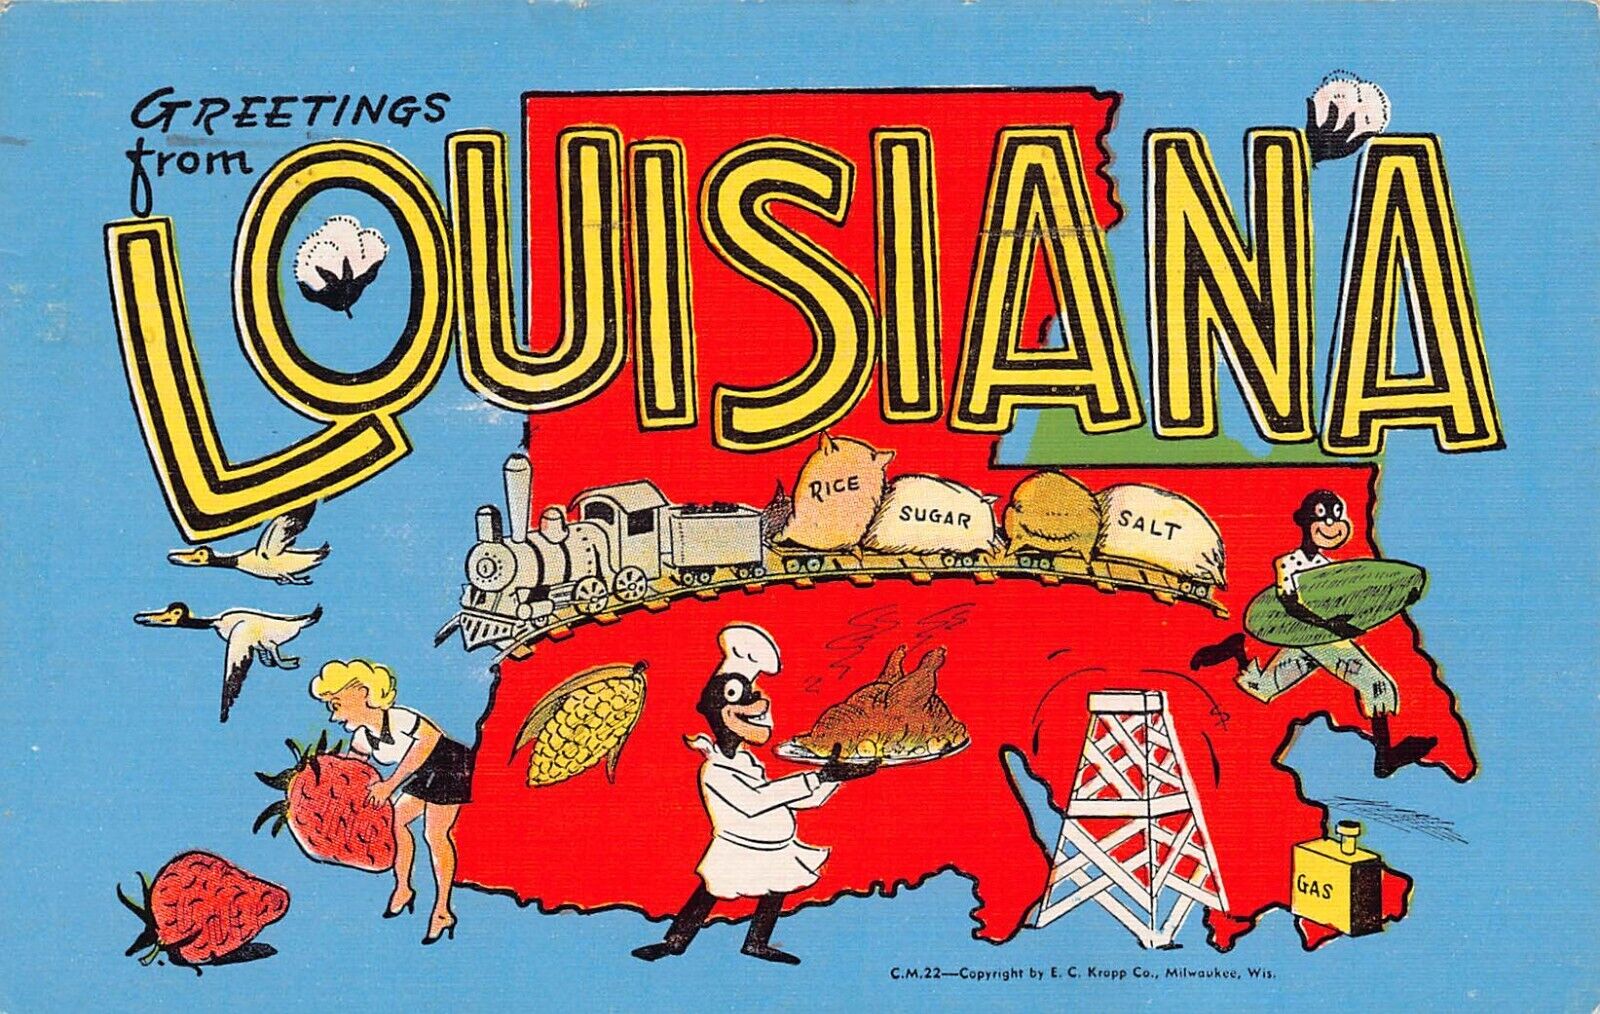 1948 Louisiana Greetings From State Large Letter 16488N-C.M.22 Postcard